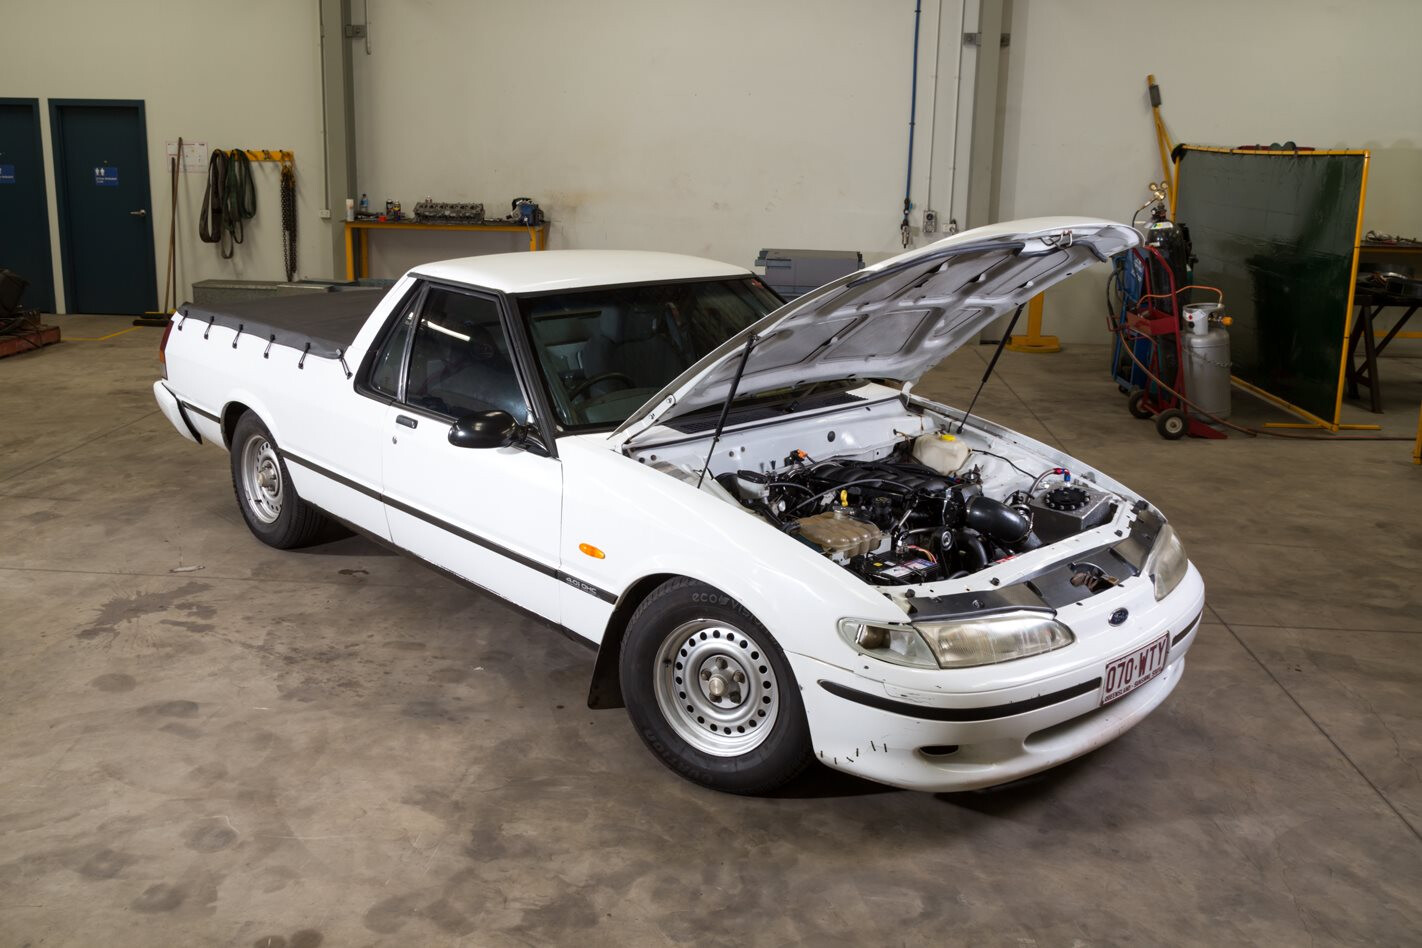 8-SECOND TWIN TURBO LS-POWERED XH FALCON UTE HEADING TO DRAG WEEK – VIDEO